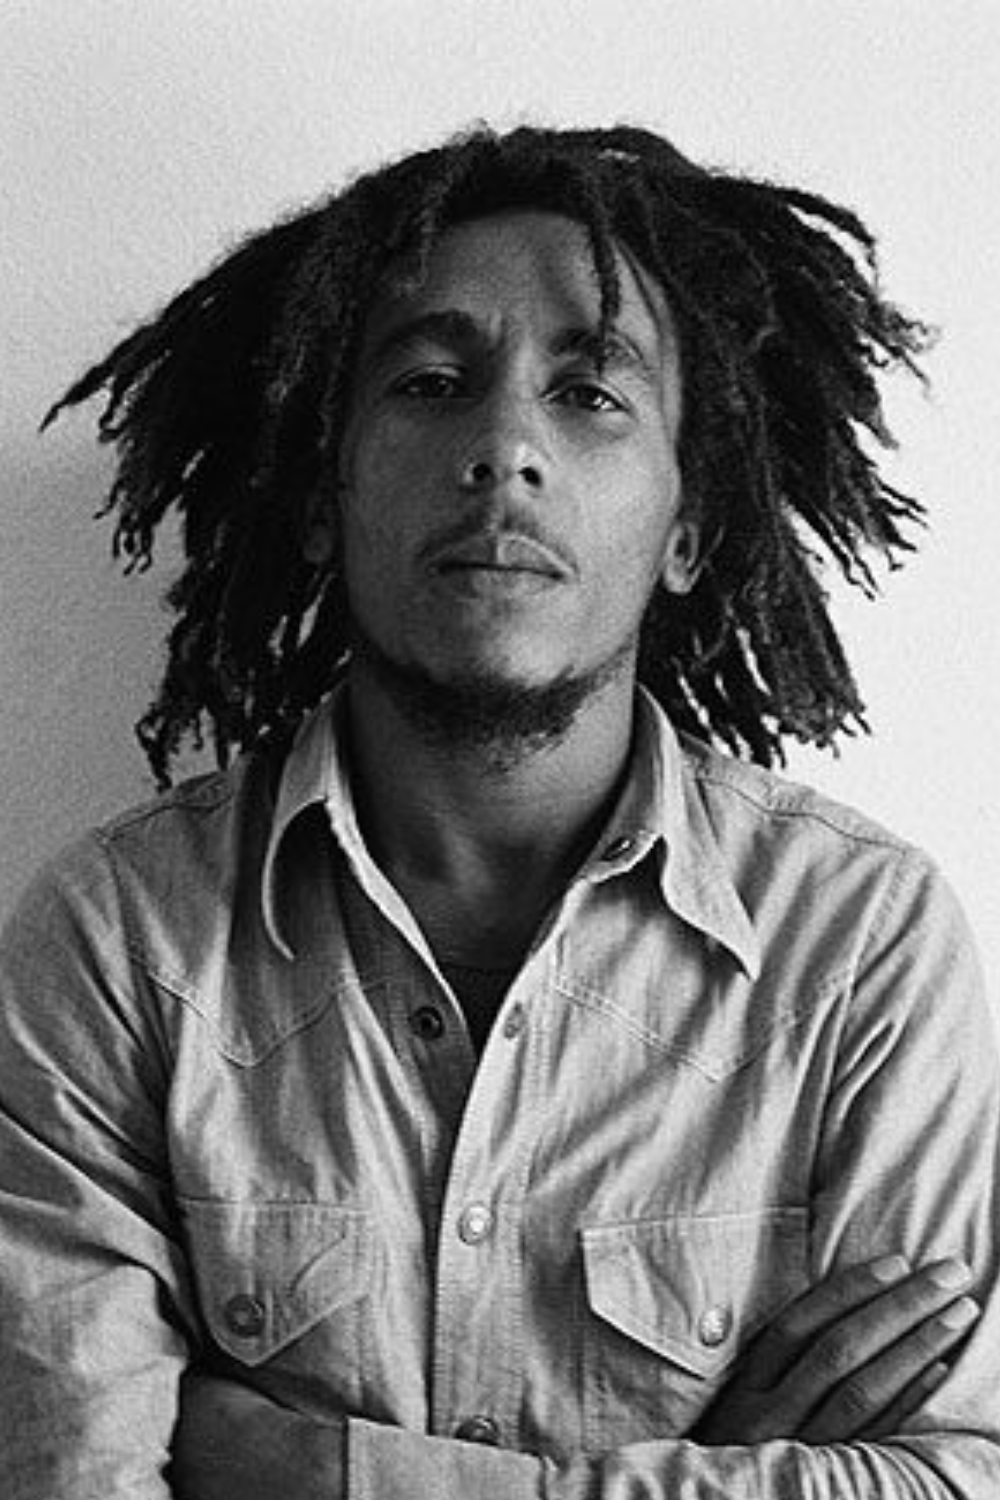 bob marley dreads in the 70s